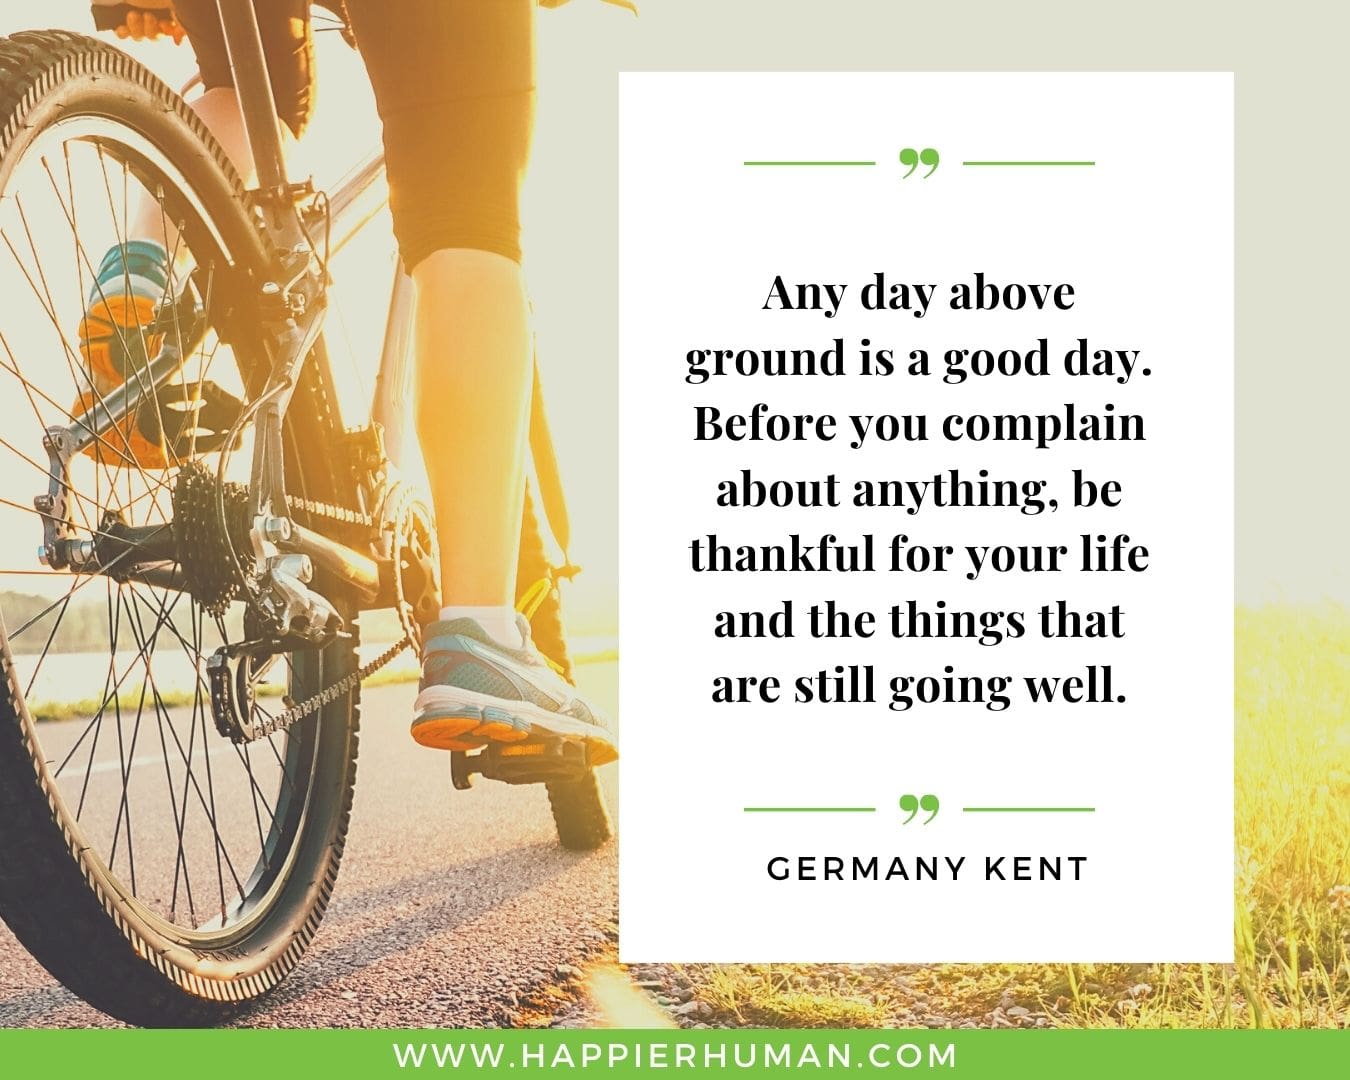 Great Day Quotes - “Any day above ground is a good day. Before you complain about anything, be thankful for your life and the things that are still going well.” – Germany Kent